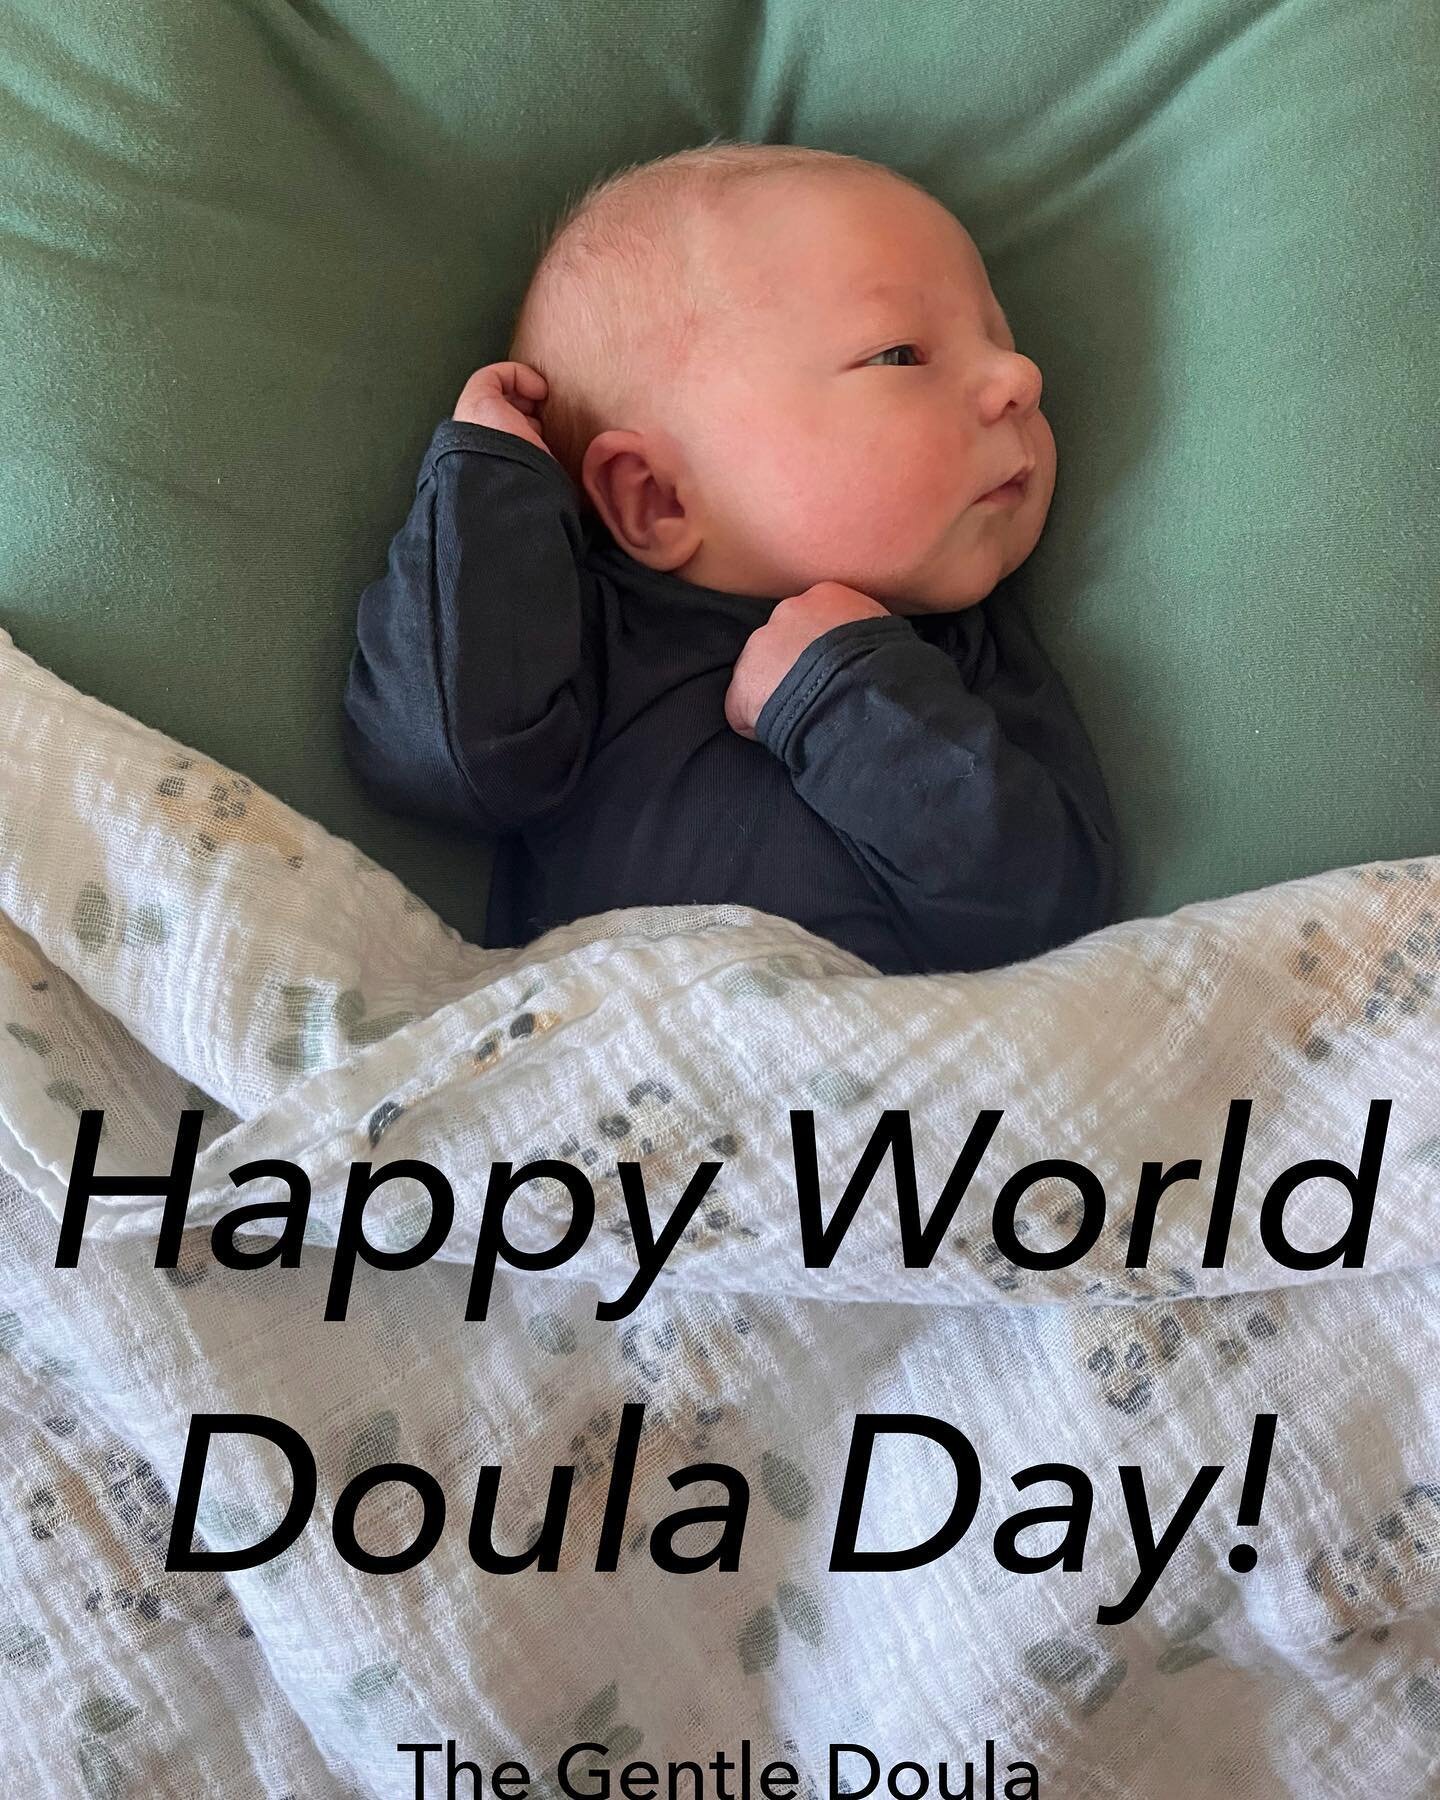 Happy world doula day! 
.
With my background in linguistics, editing and clerical work, I would never have expected to end up working as a doula. But when I decided to change careers I knew that the birth world was where I wanted to be. And when I ch